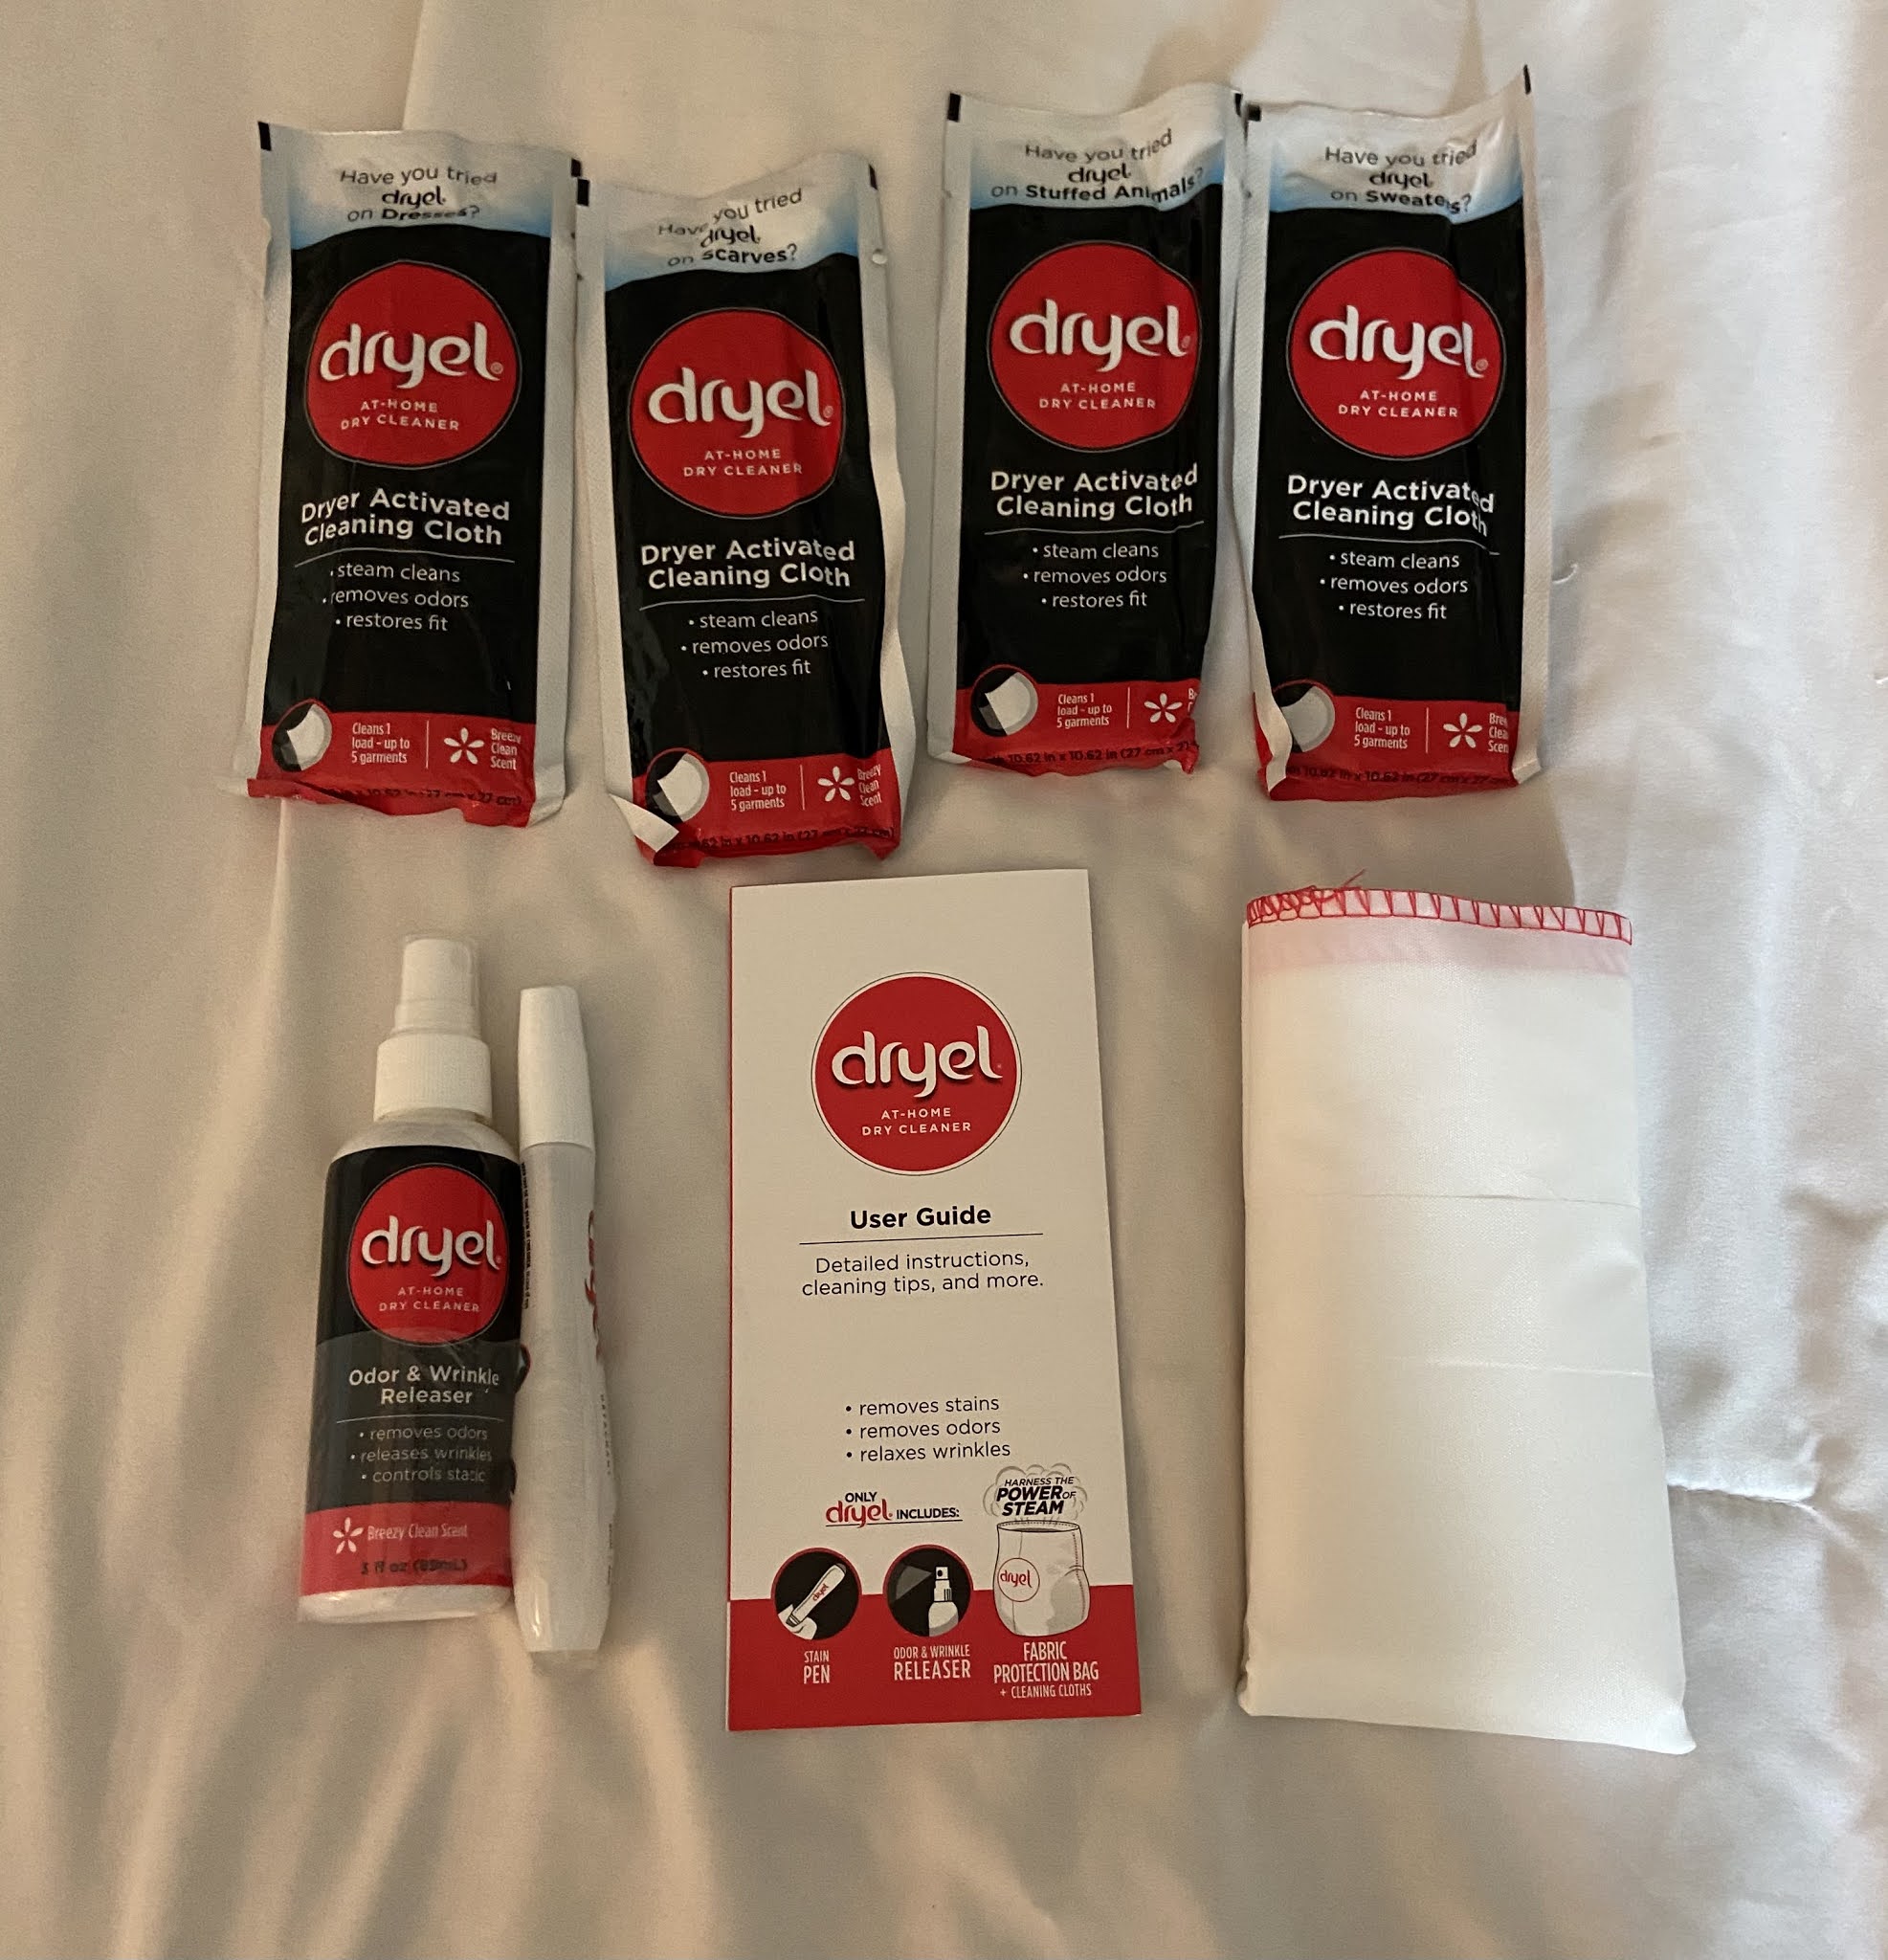 Dryel Dry Cleaning Kit – Product Review (Watch Video) - Wardrobe